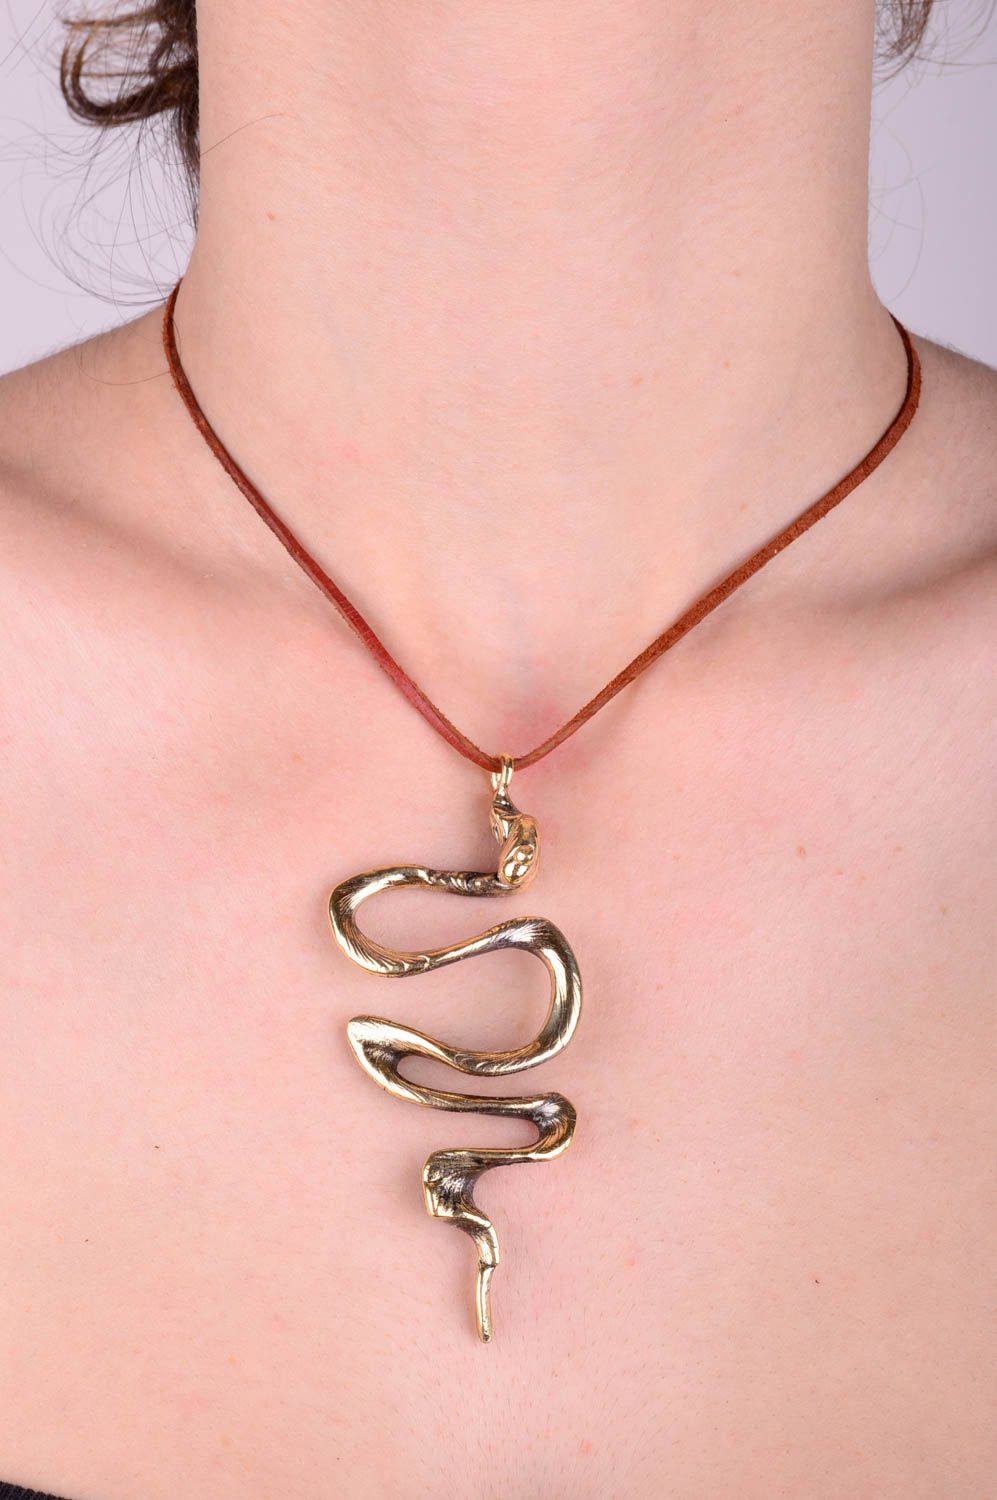 Unusual brass pendant stylish metal necklace accessory in shape of snake photo 3